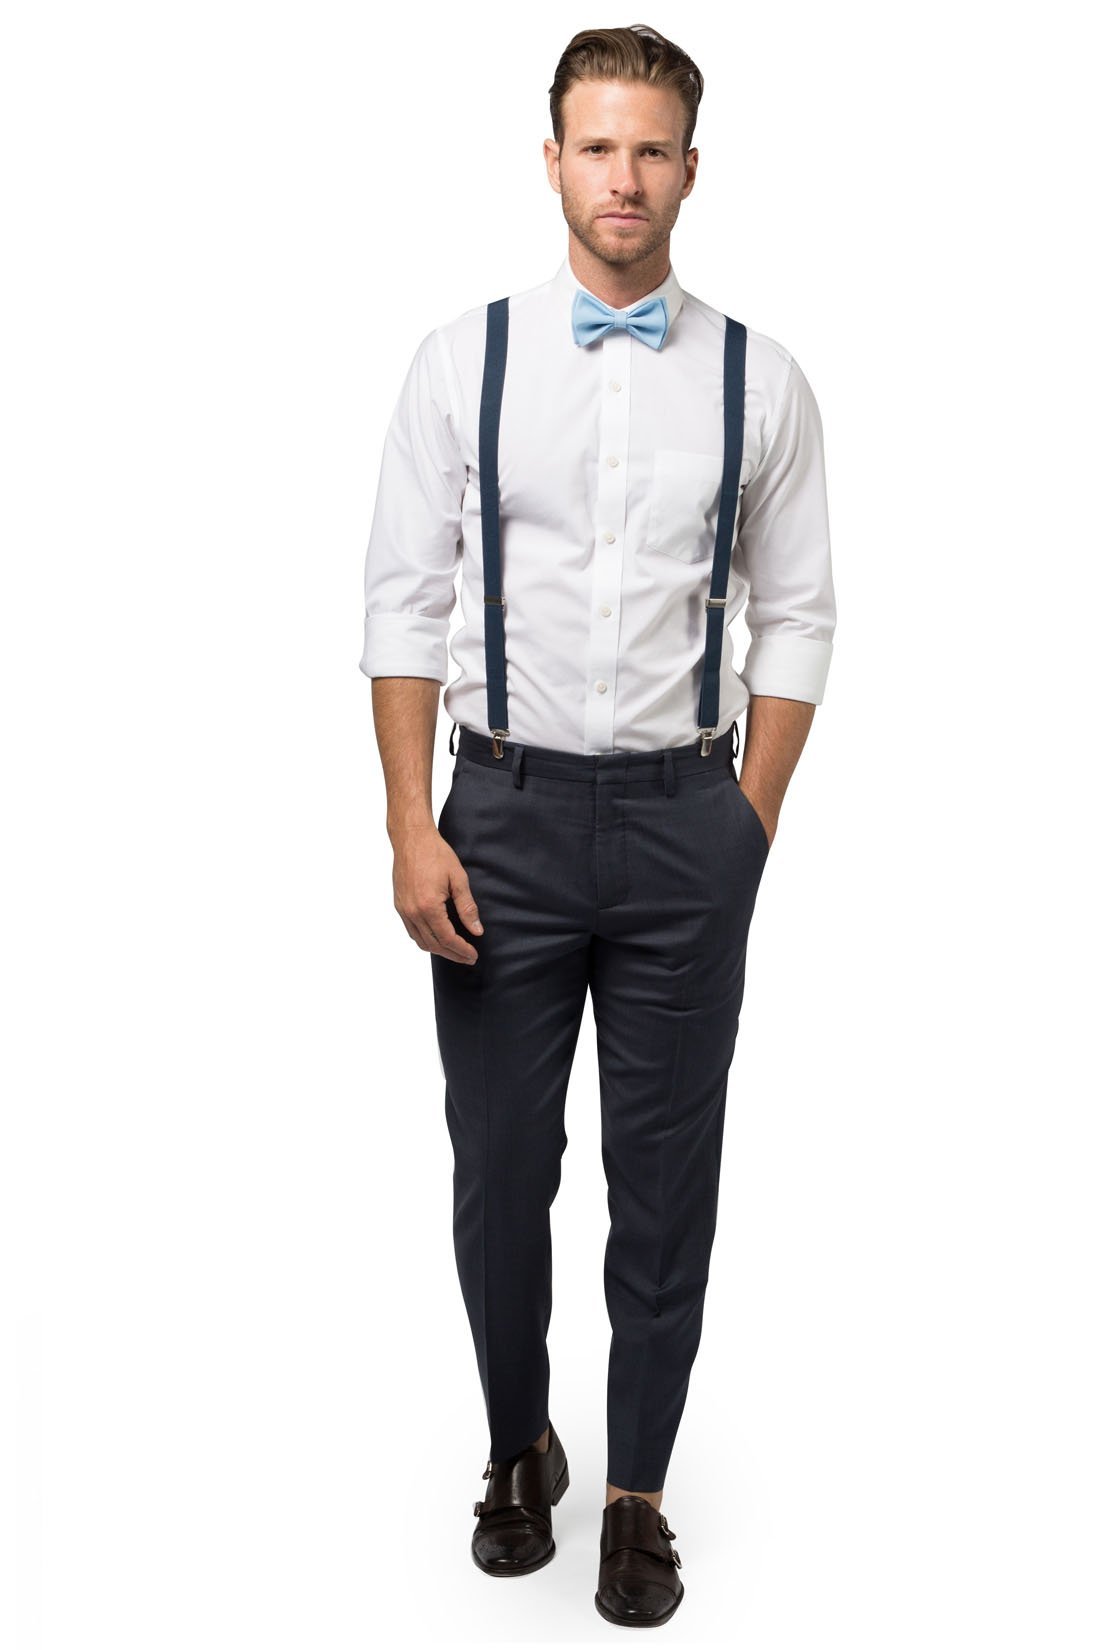 Navy Vertical Striped Dress Pants with Suspenders Outfits 5 ideas   outfits  Lookastic